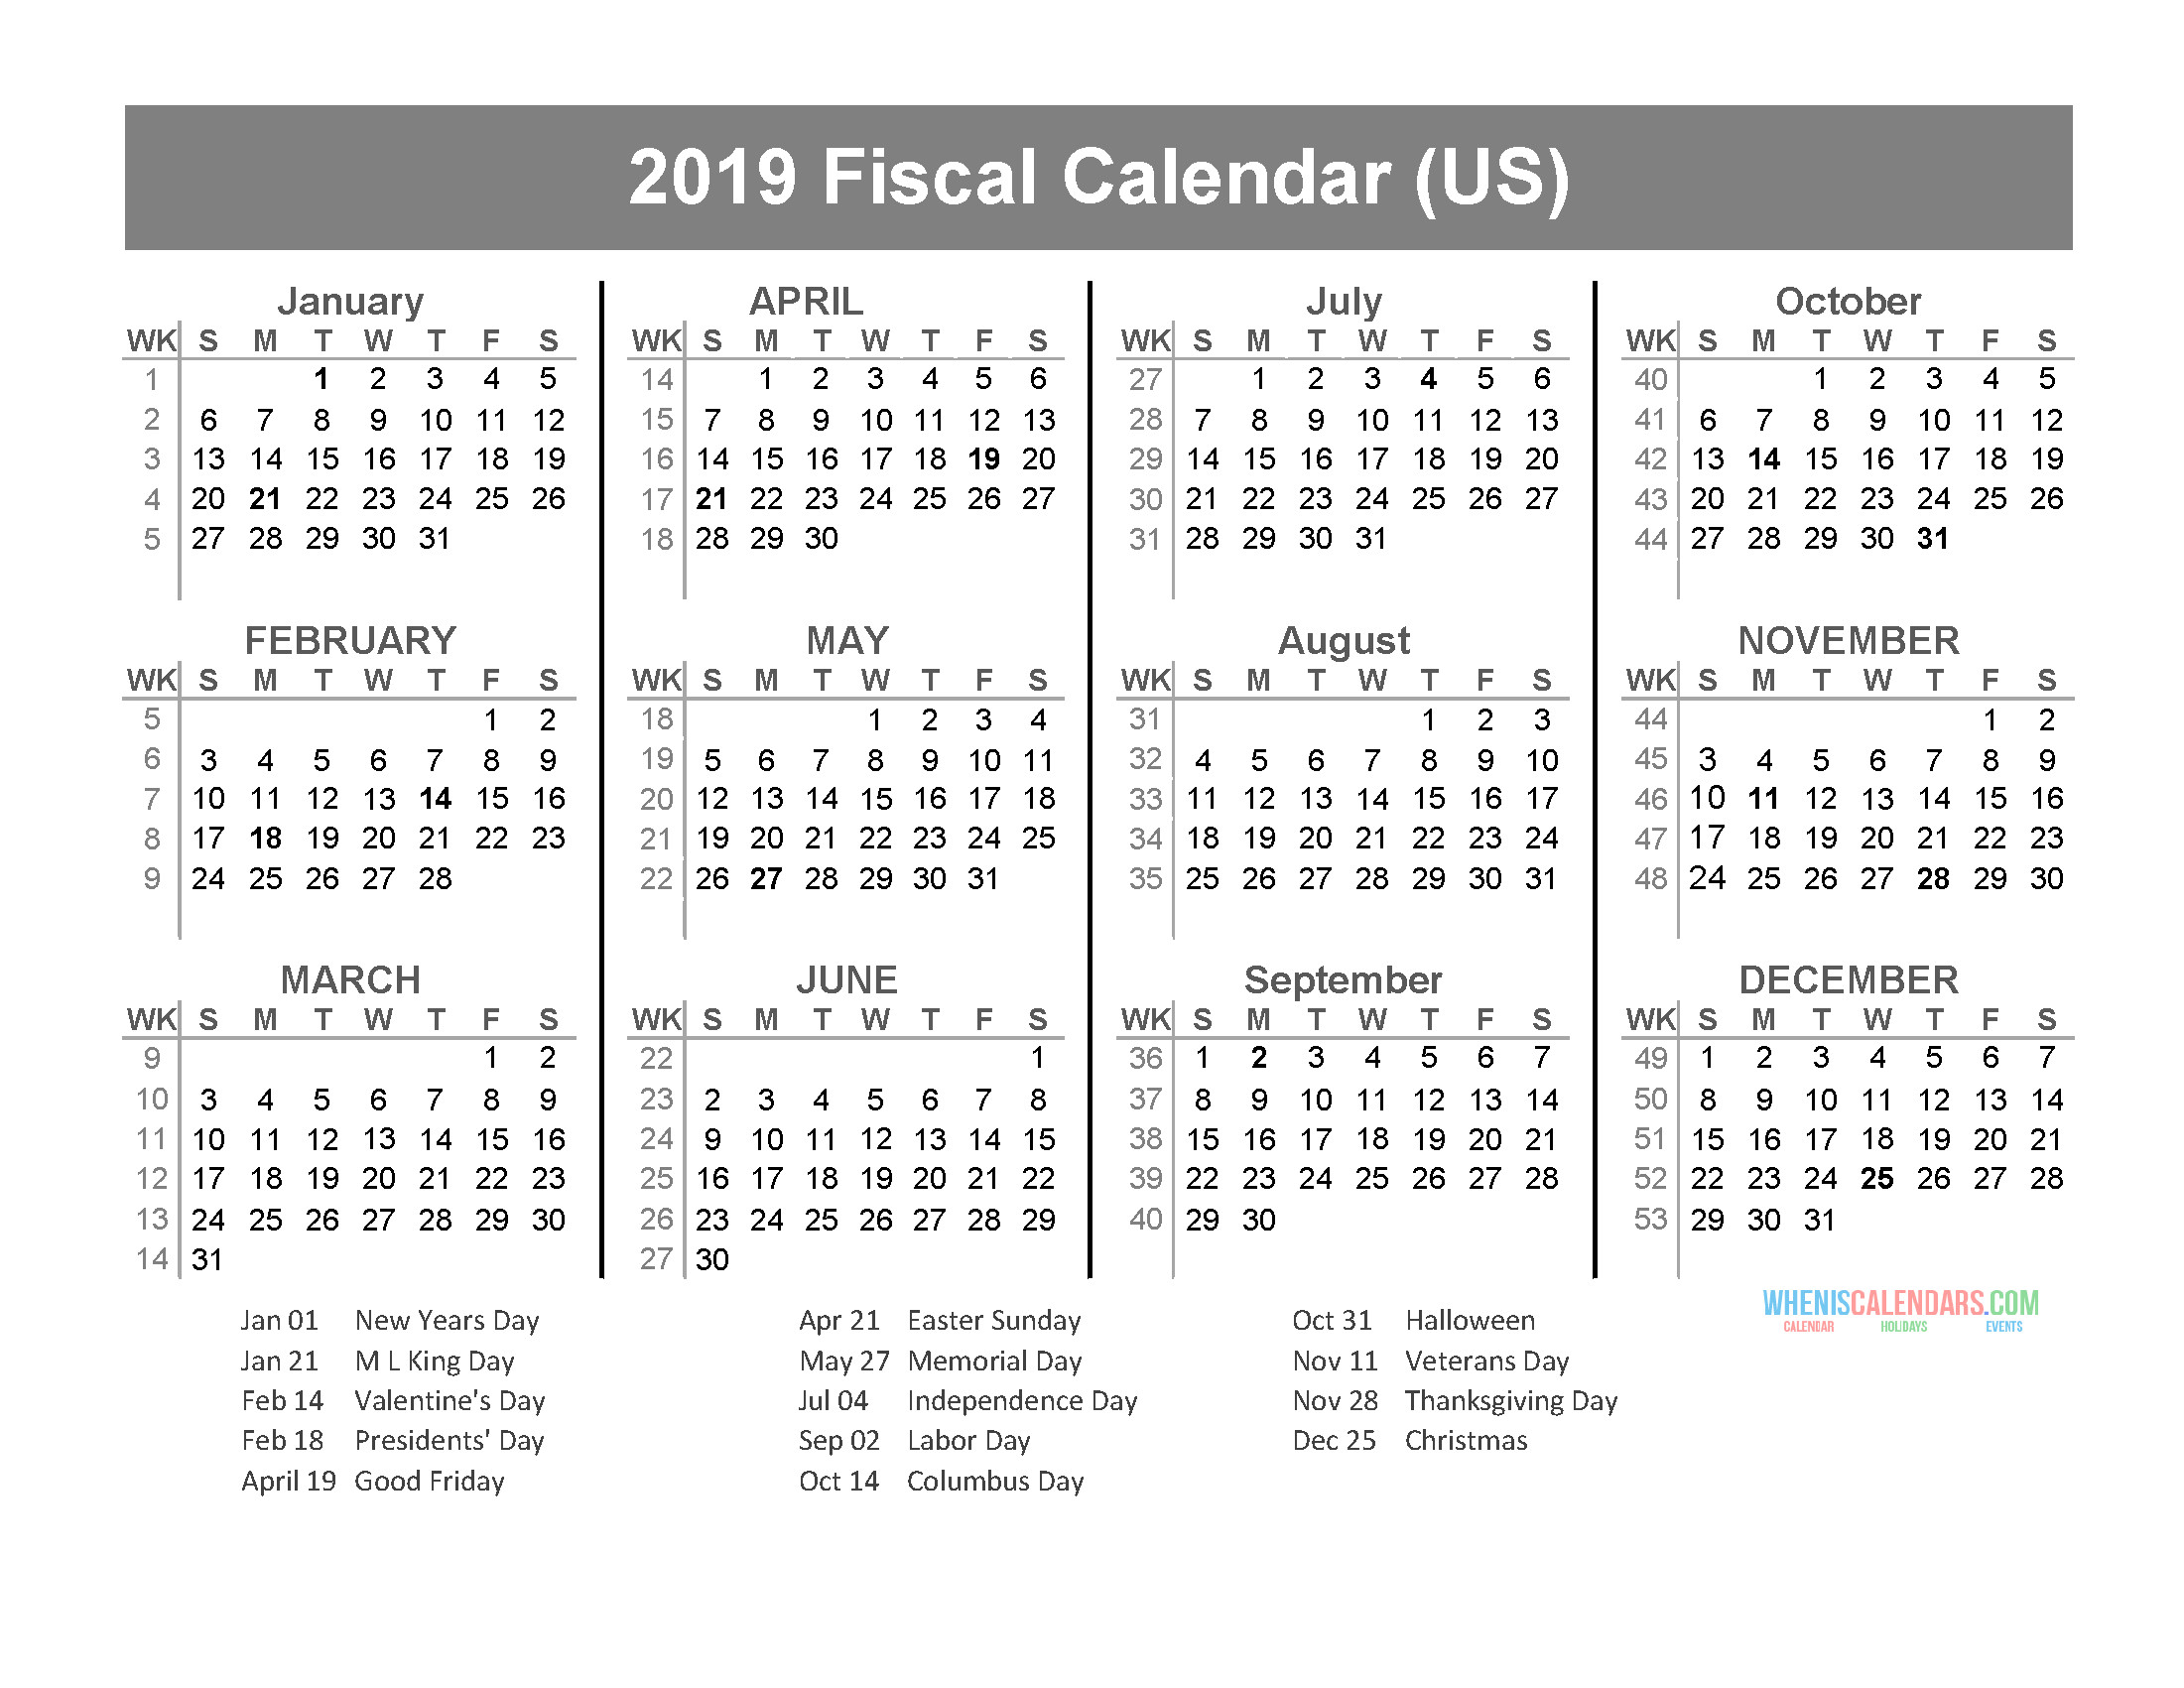 Fiscal Year 2019 Calendar With Us Holidays (January To  Fiscal Year Calendars Starting With July